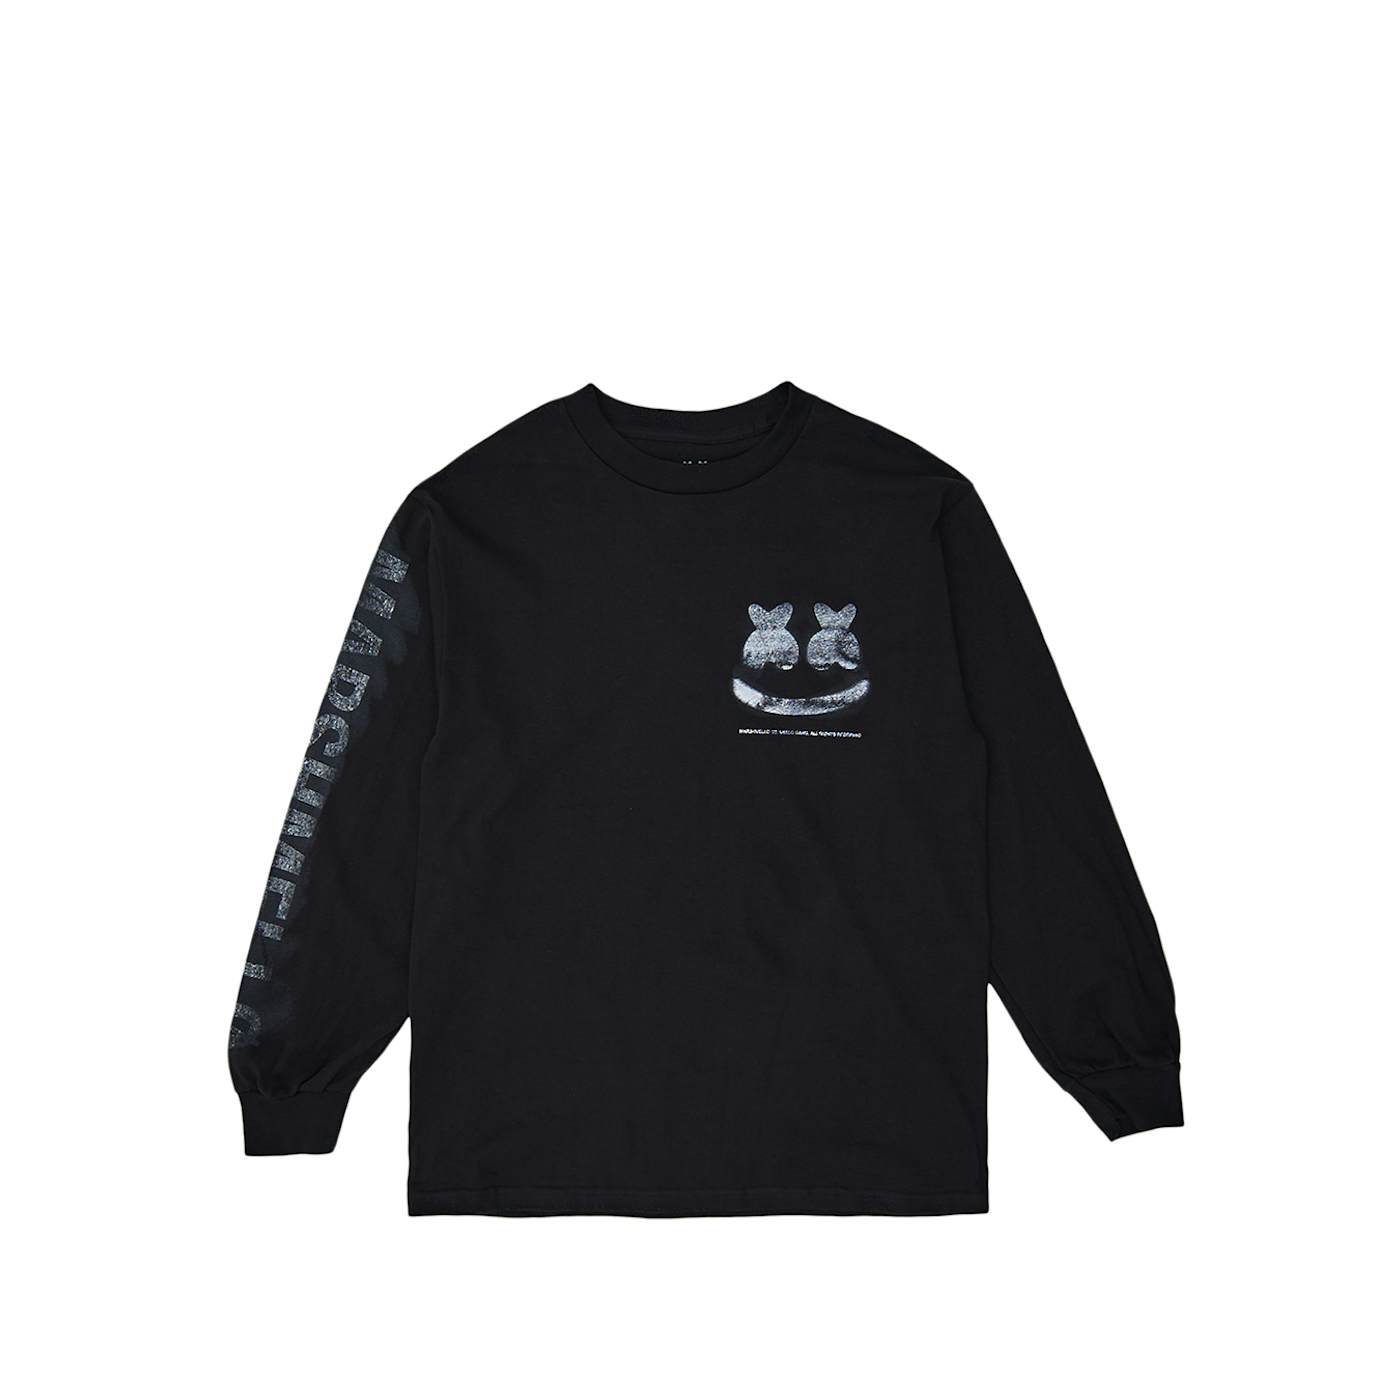 Marshmello Out of Focus L/S Shirt